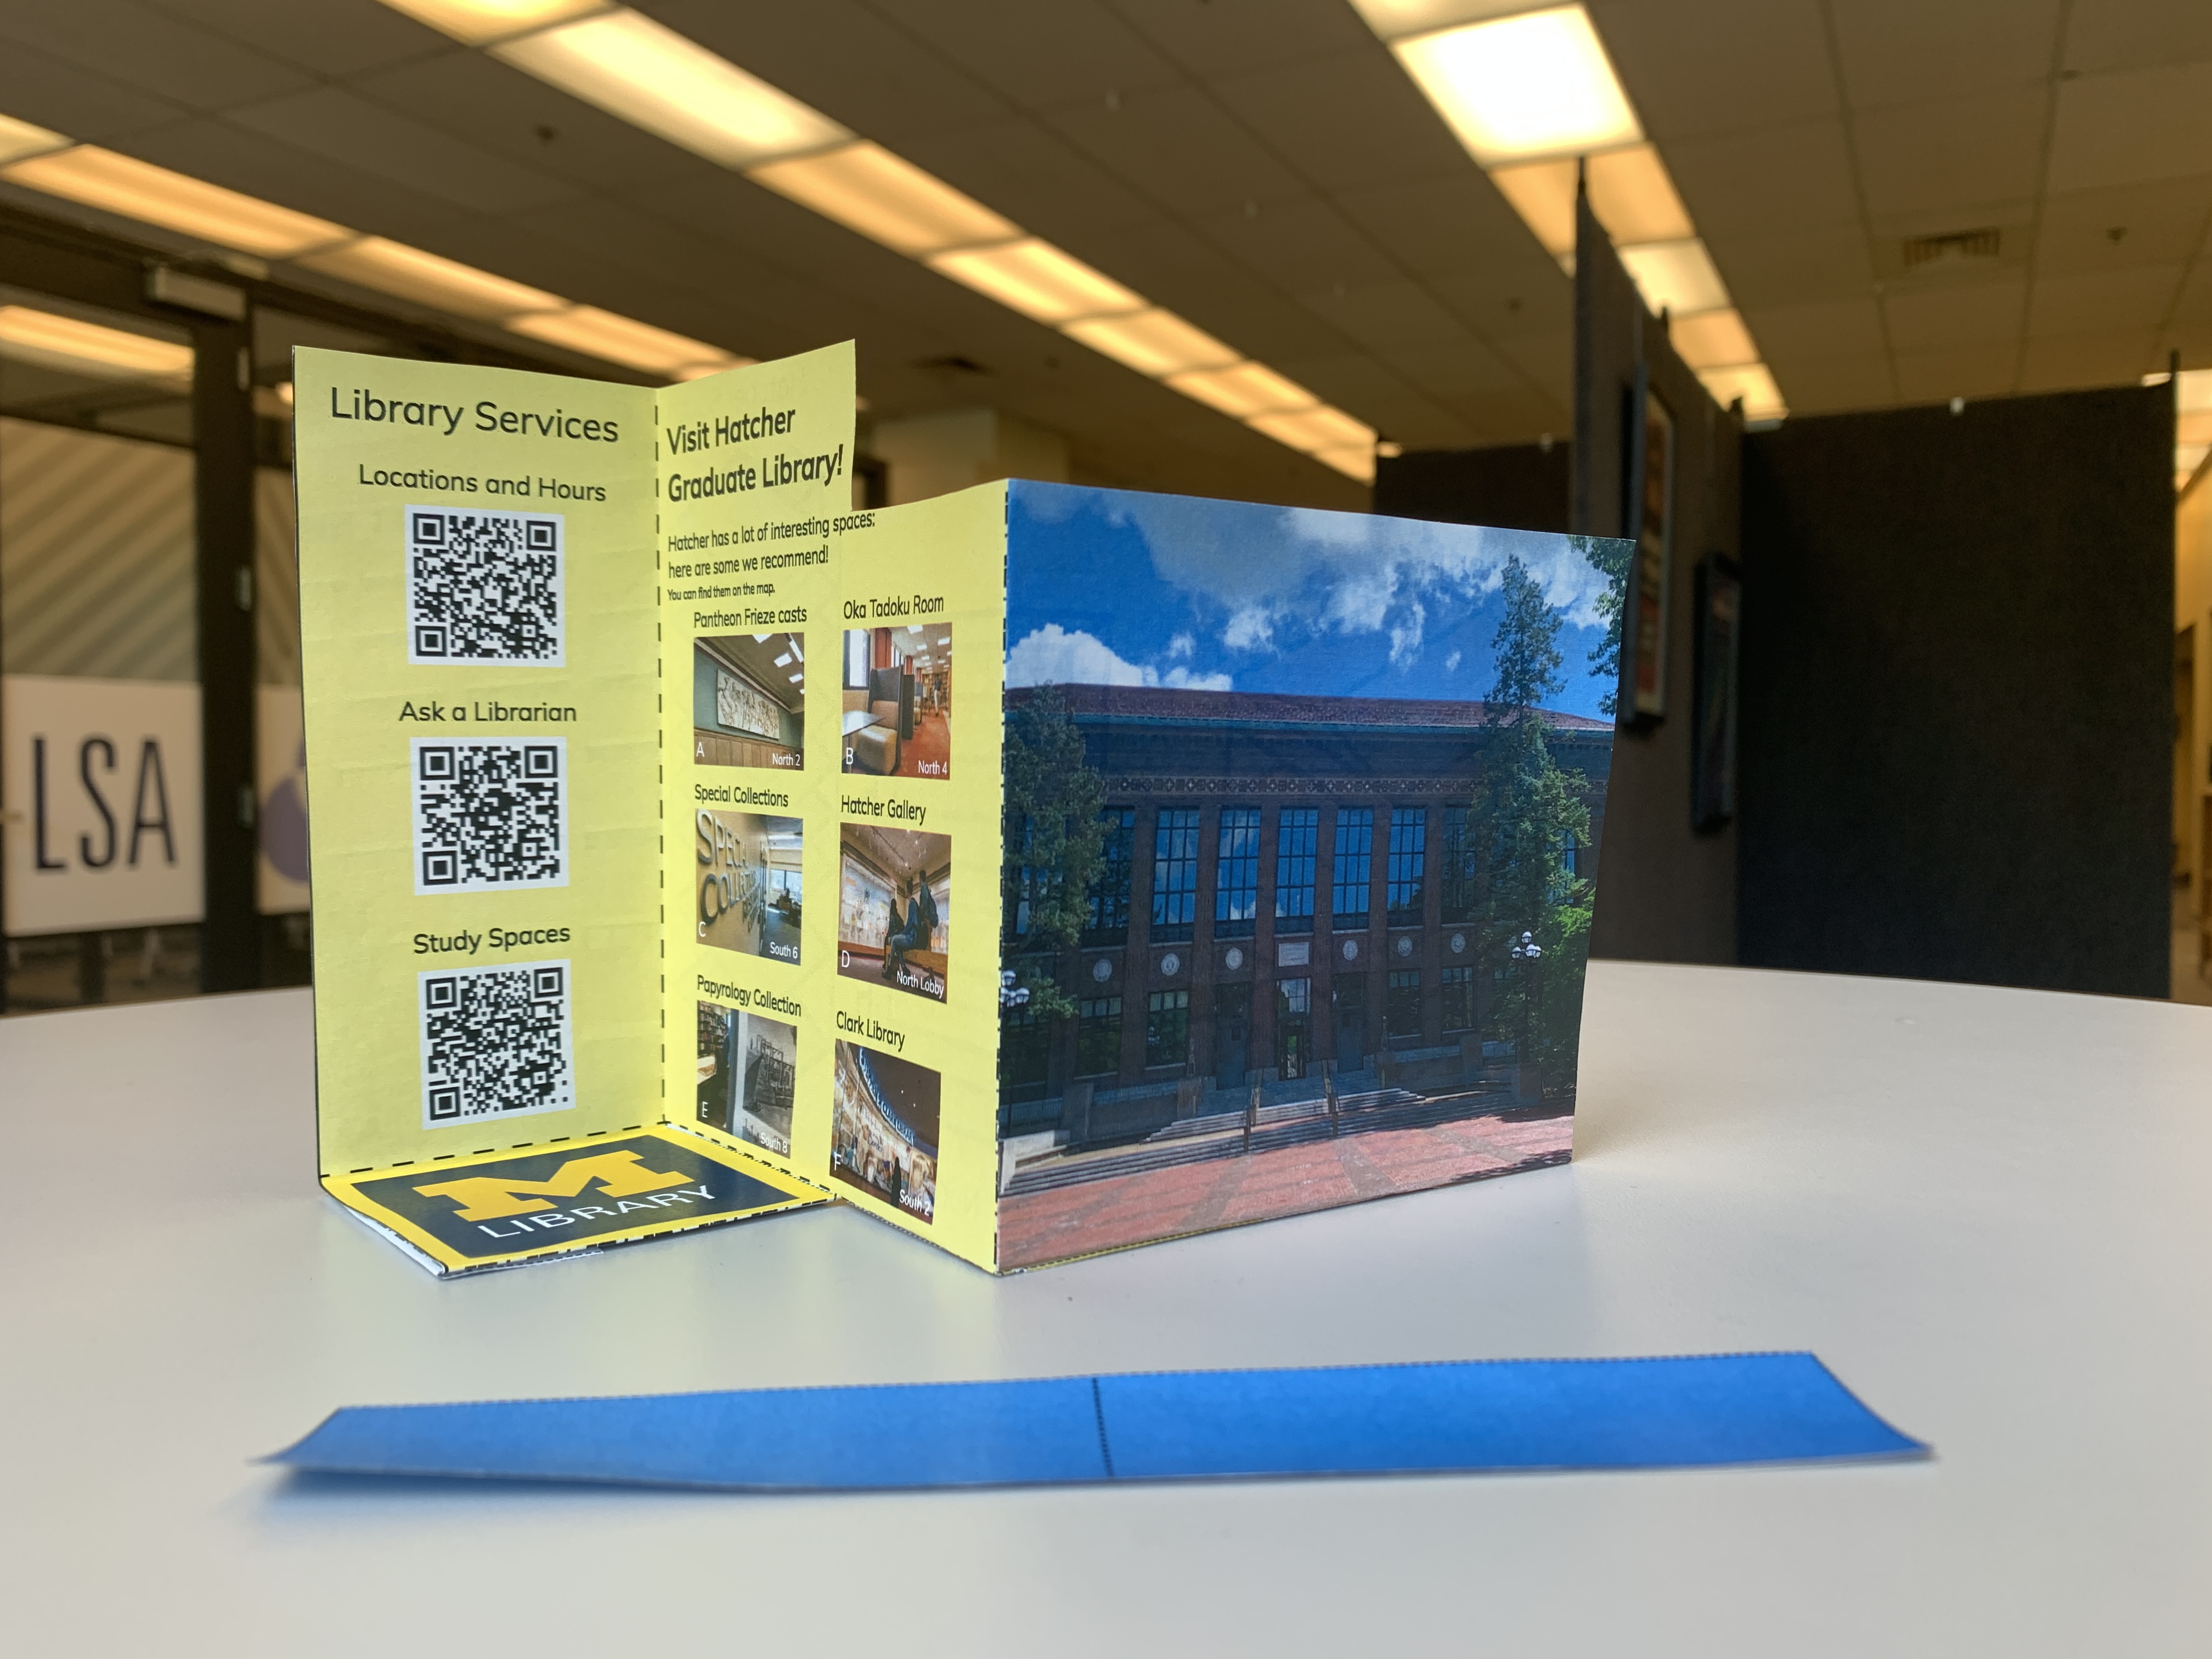 The back side of the pamphlet, with a picture of Hatcher north entrance, some information about the international components of the Library, and some QR codes to useful library services.